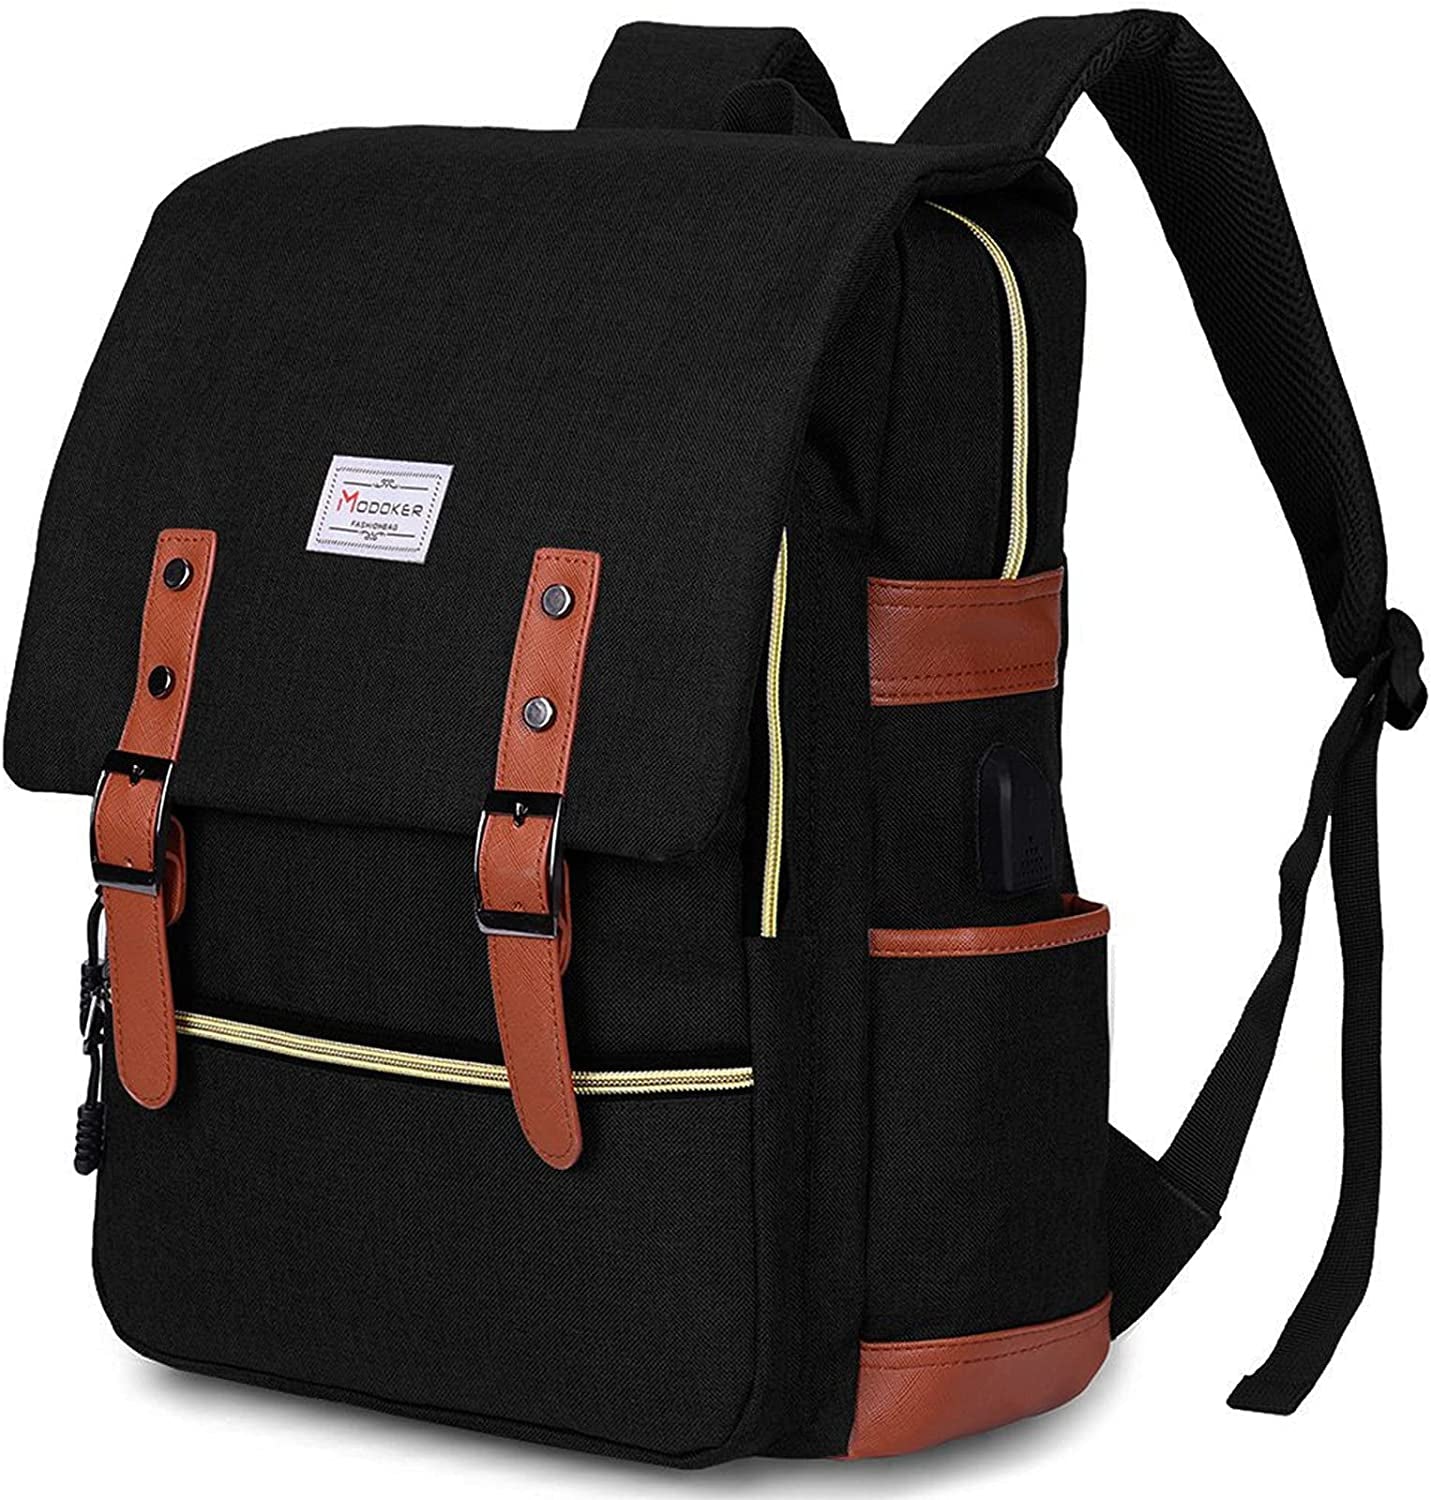 Vintage Laptop Backpack for Women Men,School College Backpack with USB Charging Port Fashion Backpack Fits 15.6Inch Notebook